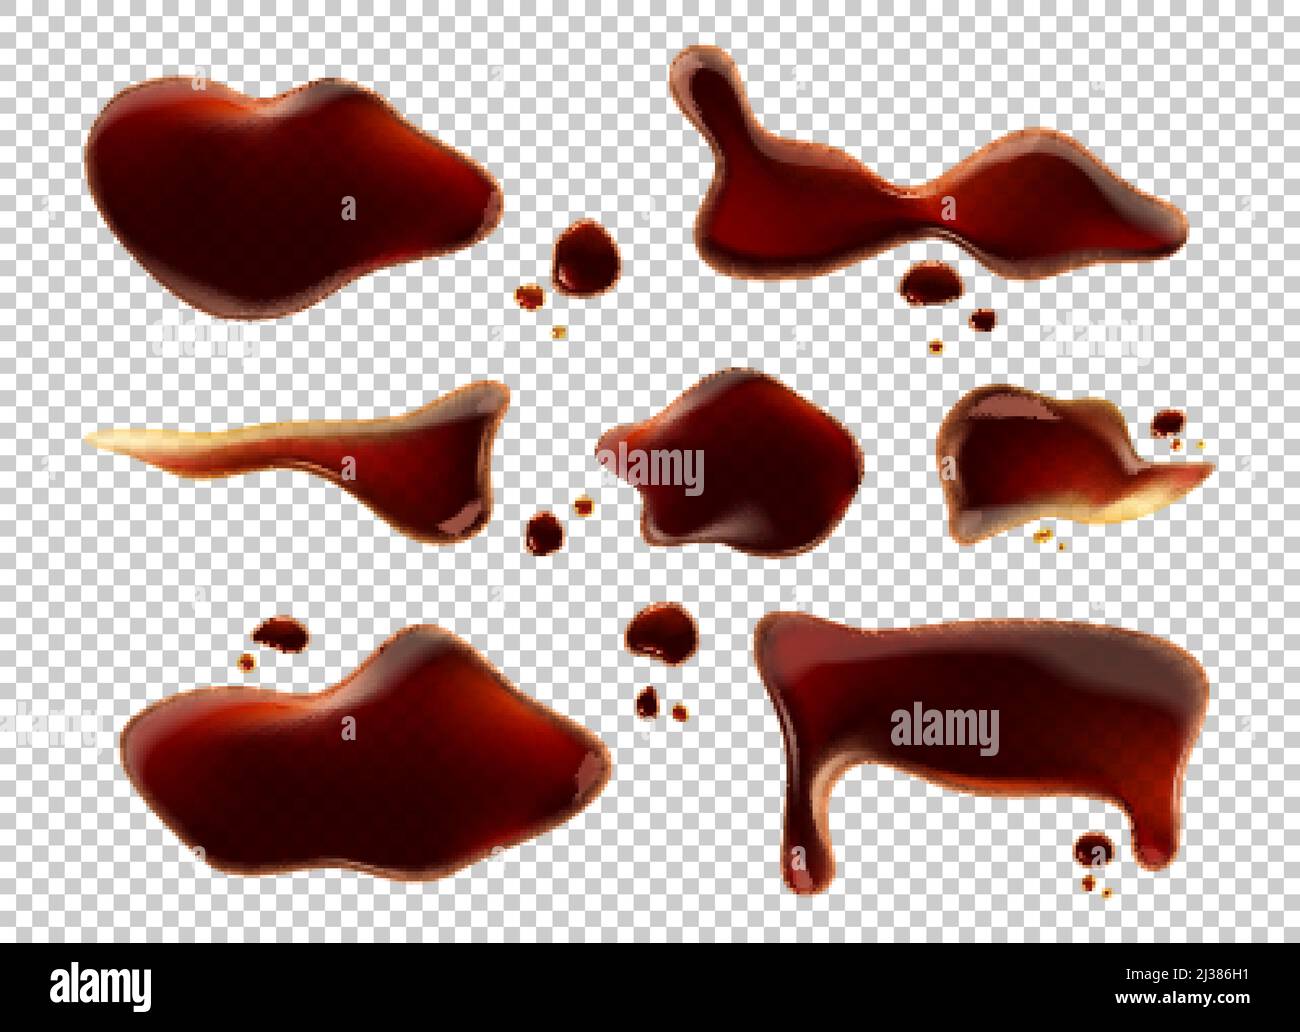 https://c8.alamy.com/comp/2J386H1/spill-soy-sauce-or-cola-puddle-isolated-brown-liquid-drops-top-view-on-transparent-background-soda-drink-brown-splatters-abstract-spilled-asian-cond-2J386H1.jpg